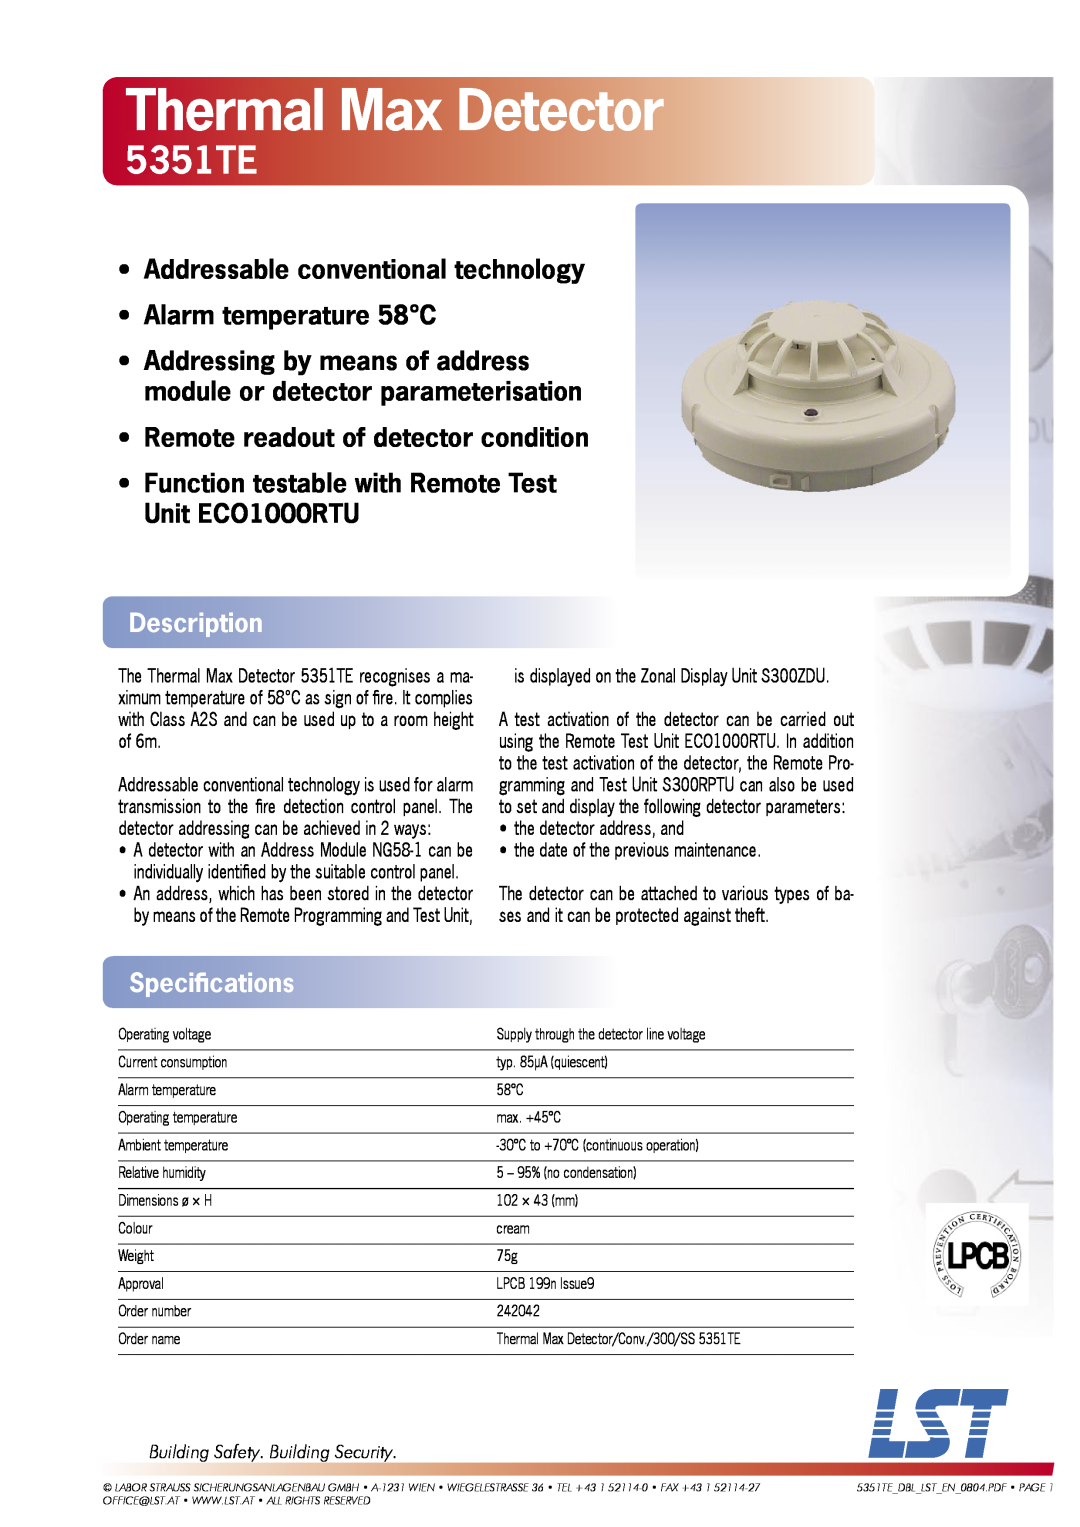 LST 5351TE specifications Thermal Max Detector, Addressable conventional technology, Alarm temperature 58C, Description 